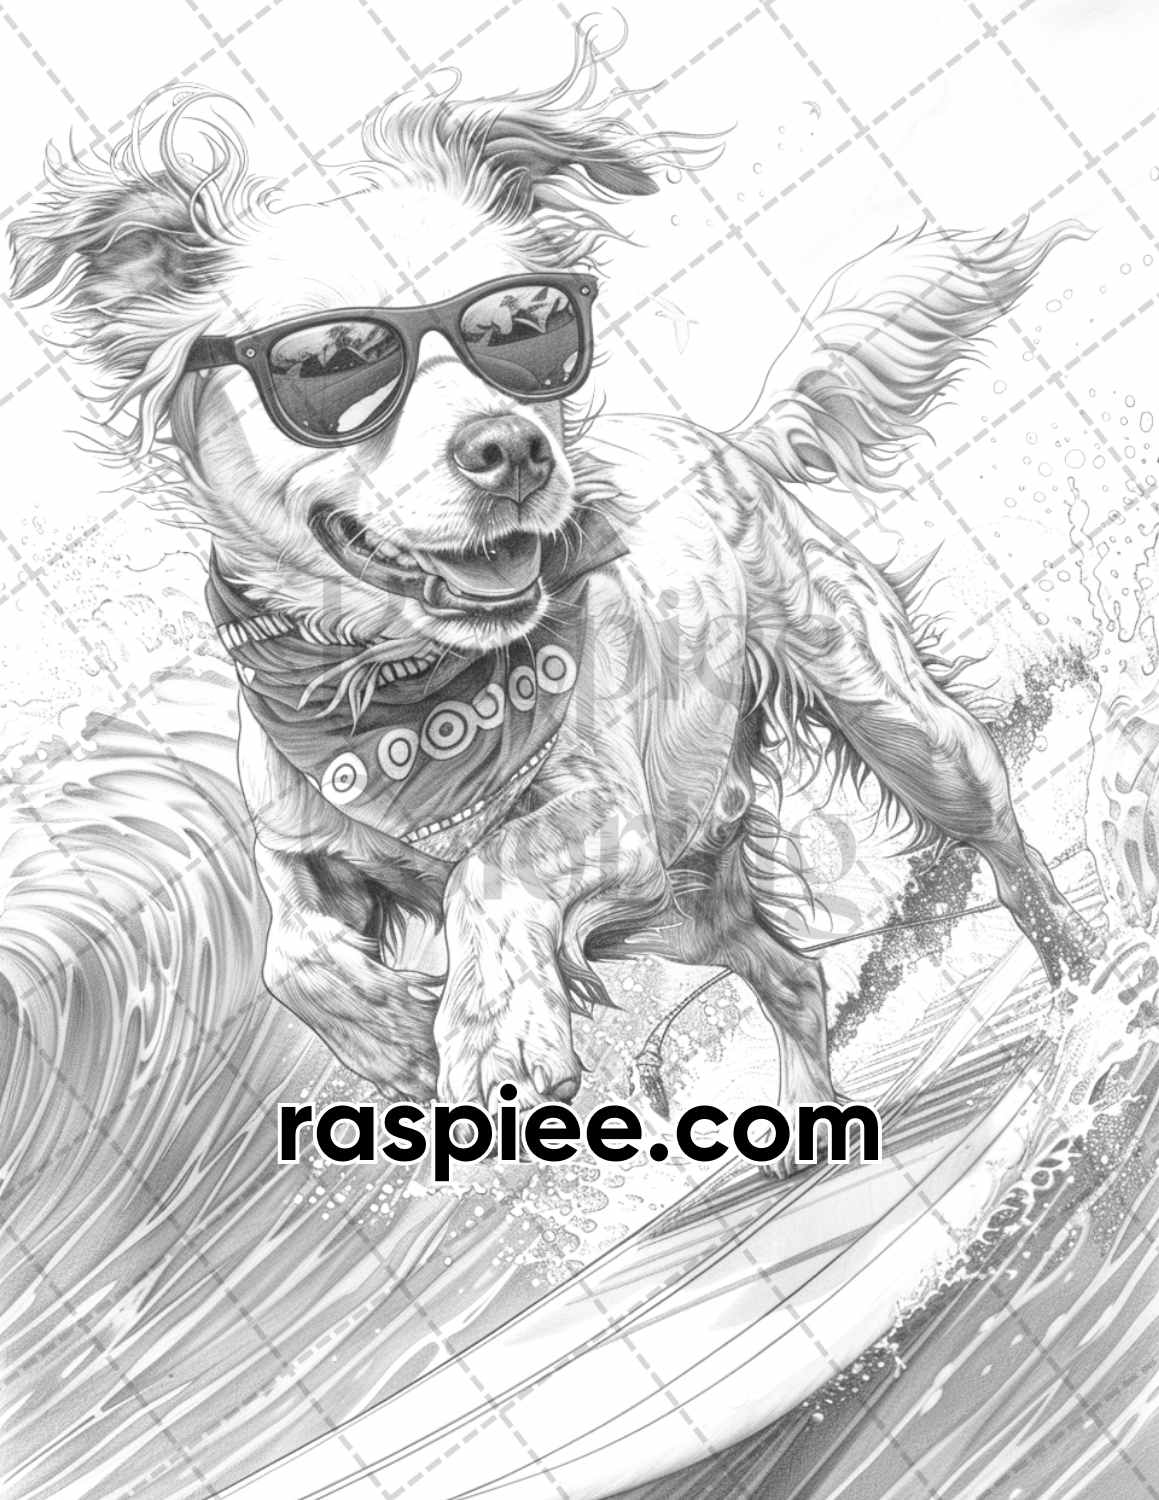 adult coloring pages, adult coloring sheets, adult coloring book pdf, adult coloring book printable, grayscale coloring pages, grayscale coloring books, dog coloring pages for adults, dog coloring book, grayscale illustration, summer coloring pages, animal coloring pages